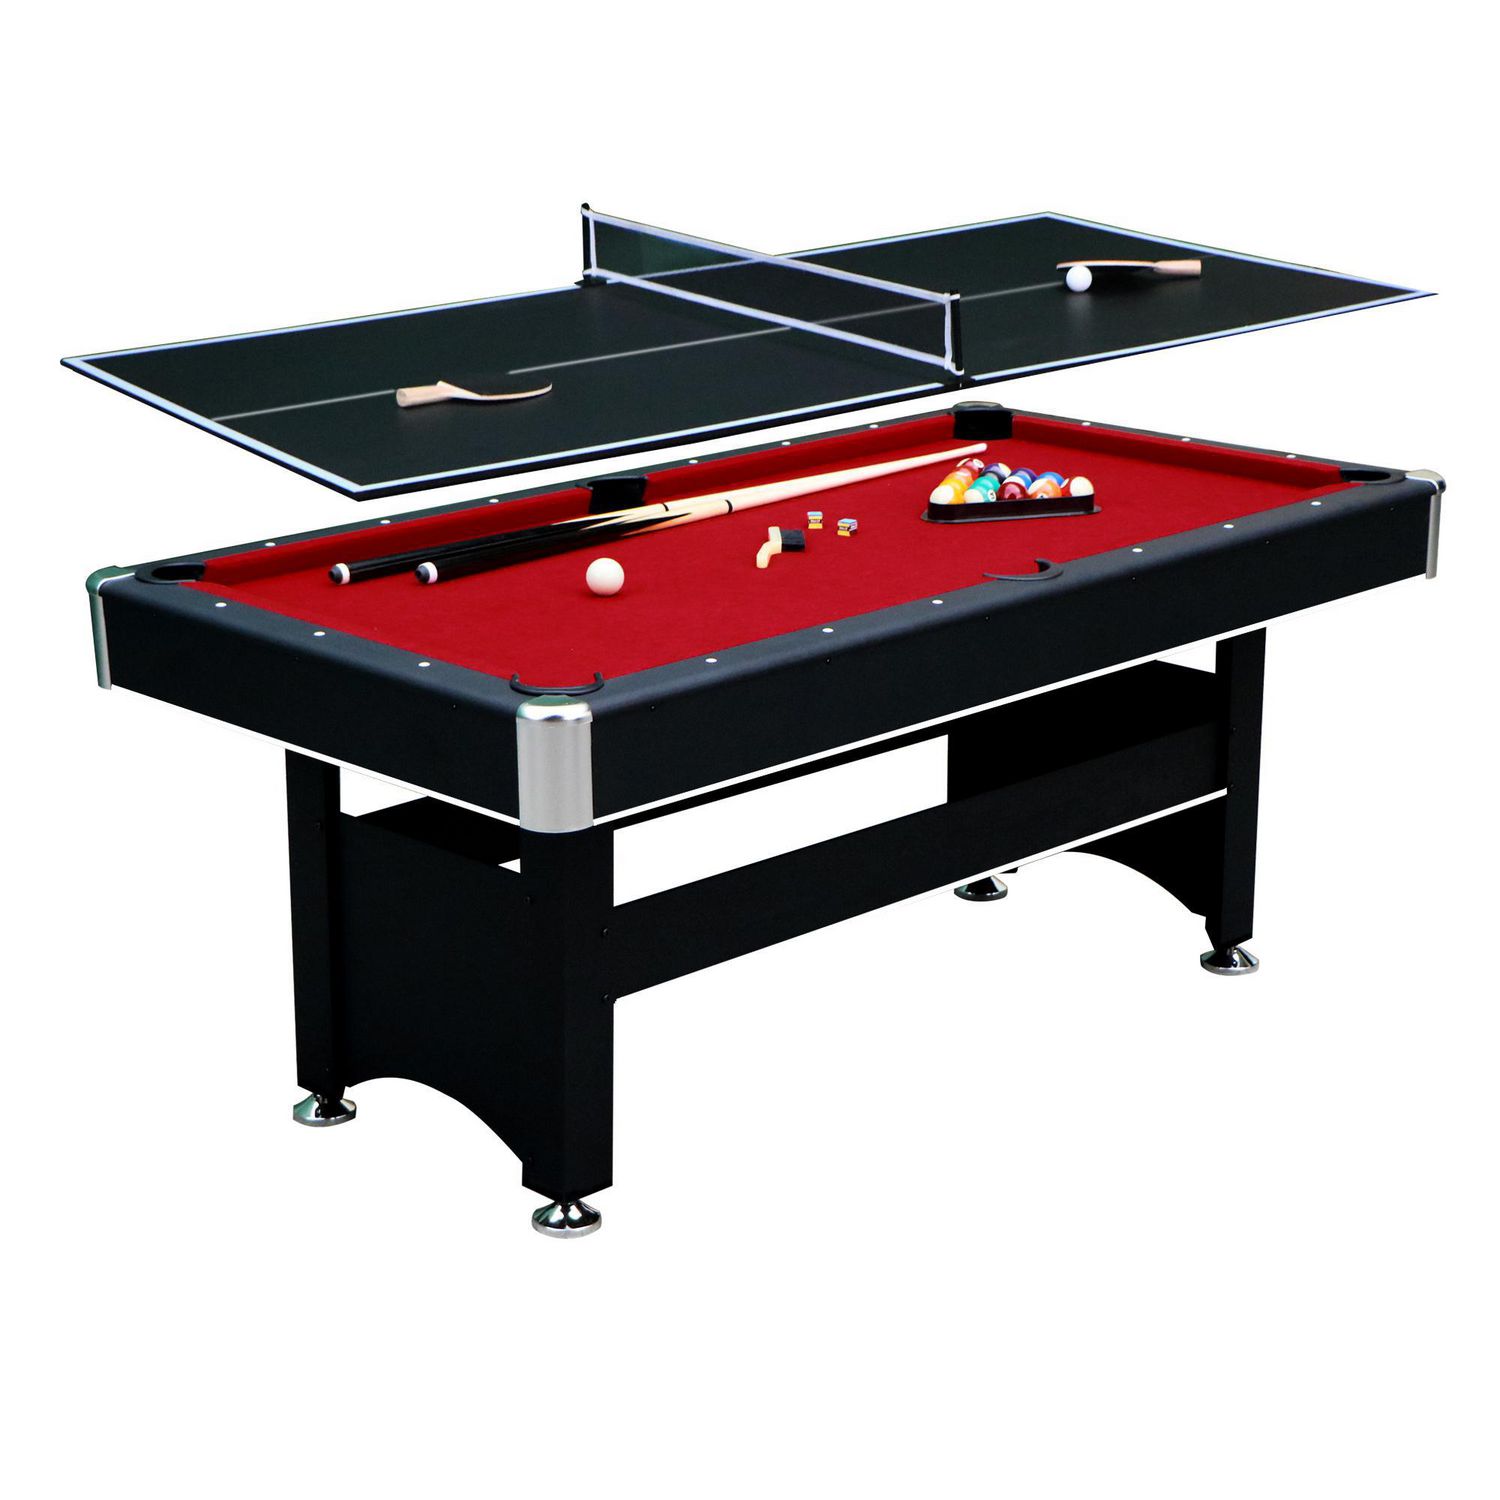 Spartan 6ft Pool Table with Table Tennis Conversion Top Walmart Canada